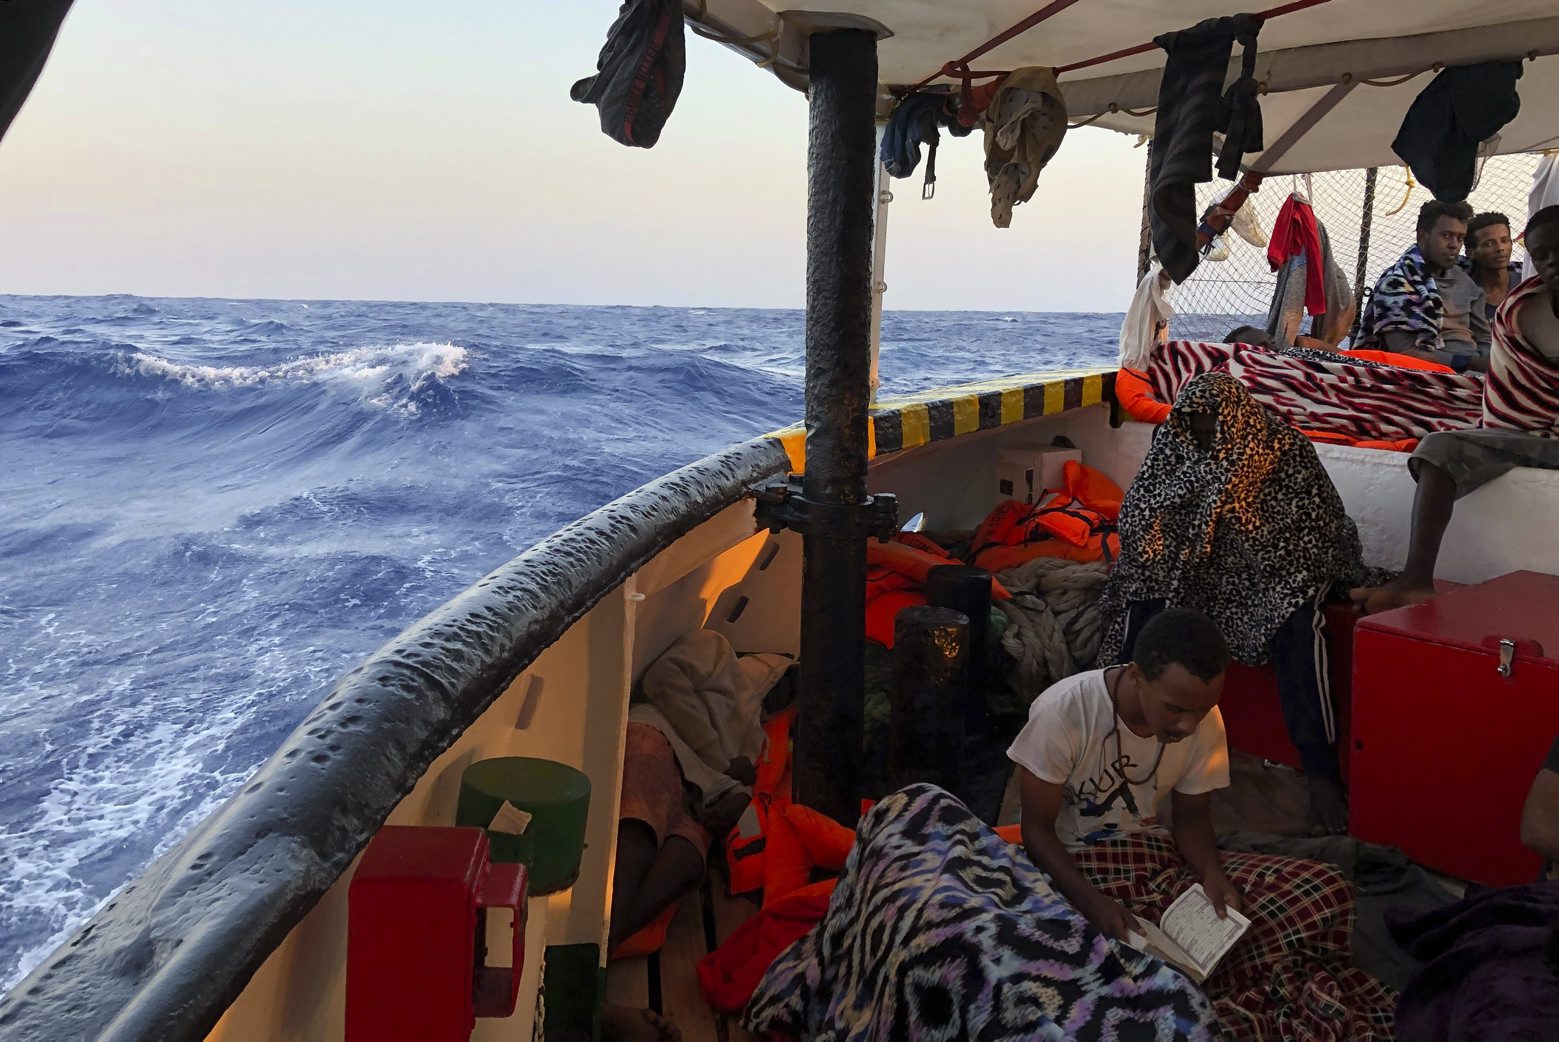 A migrant reads verses of the Quran aboard the Open Arms Spanish humanitarian boat as it arrives near Lampedusa coast in the Mediterranean Sea, Thursday, Aug.15, 2019. A Spanish aid boat with 147 rescued migrants aboard is anchored off a southern Italian island as Italy's ministers spar over their fate. (AP Photo/Francisco Gentico) Europe Migrants